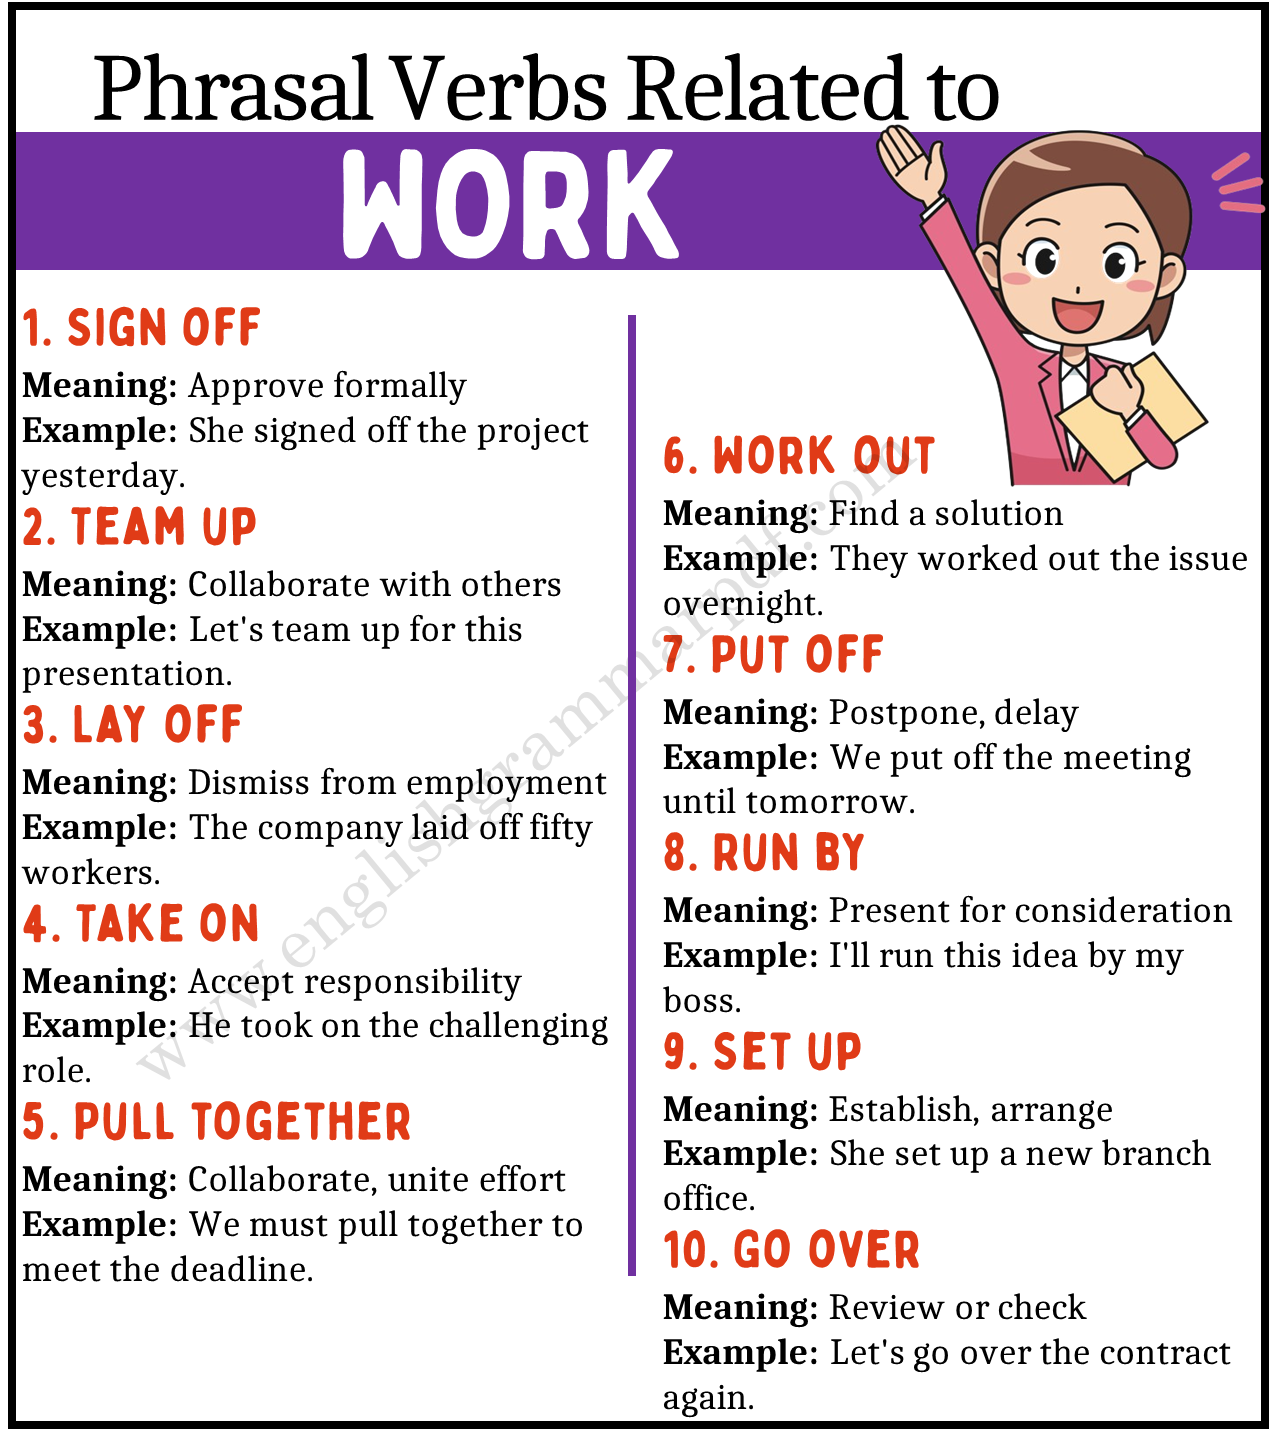 Phrasal Verbs Related to Work